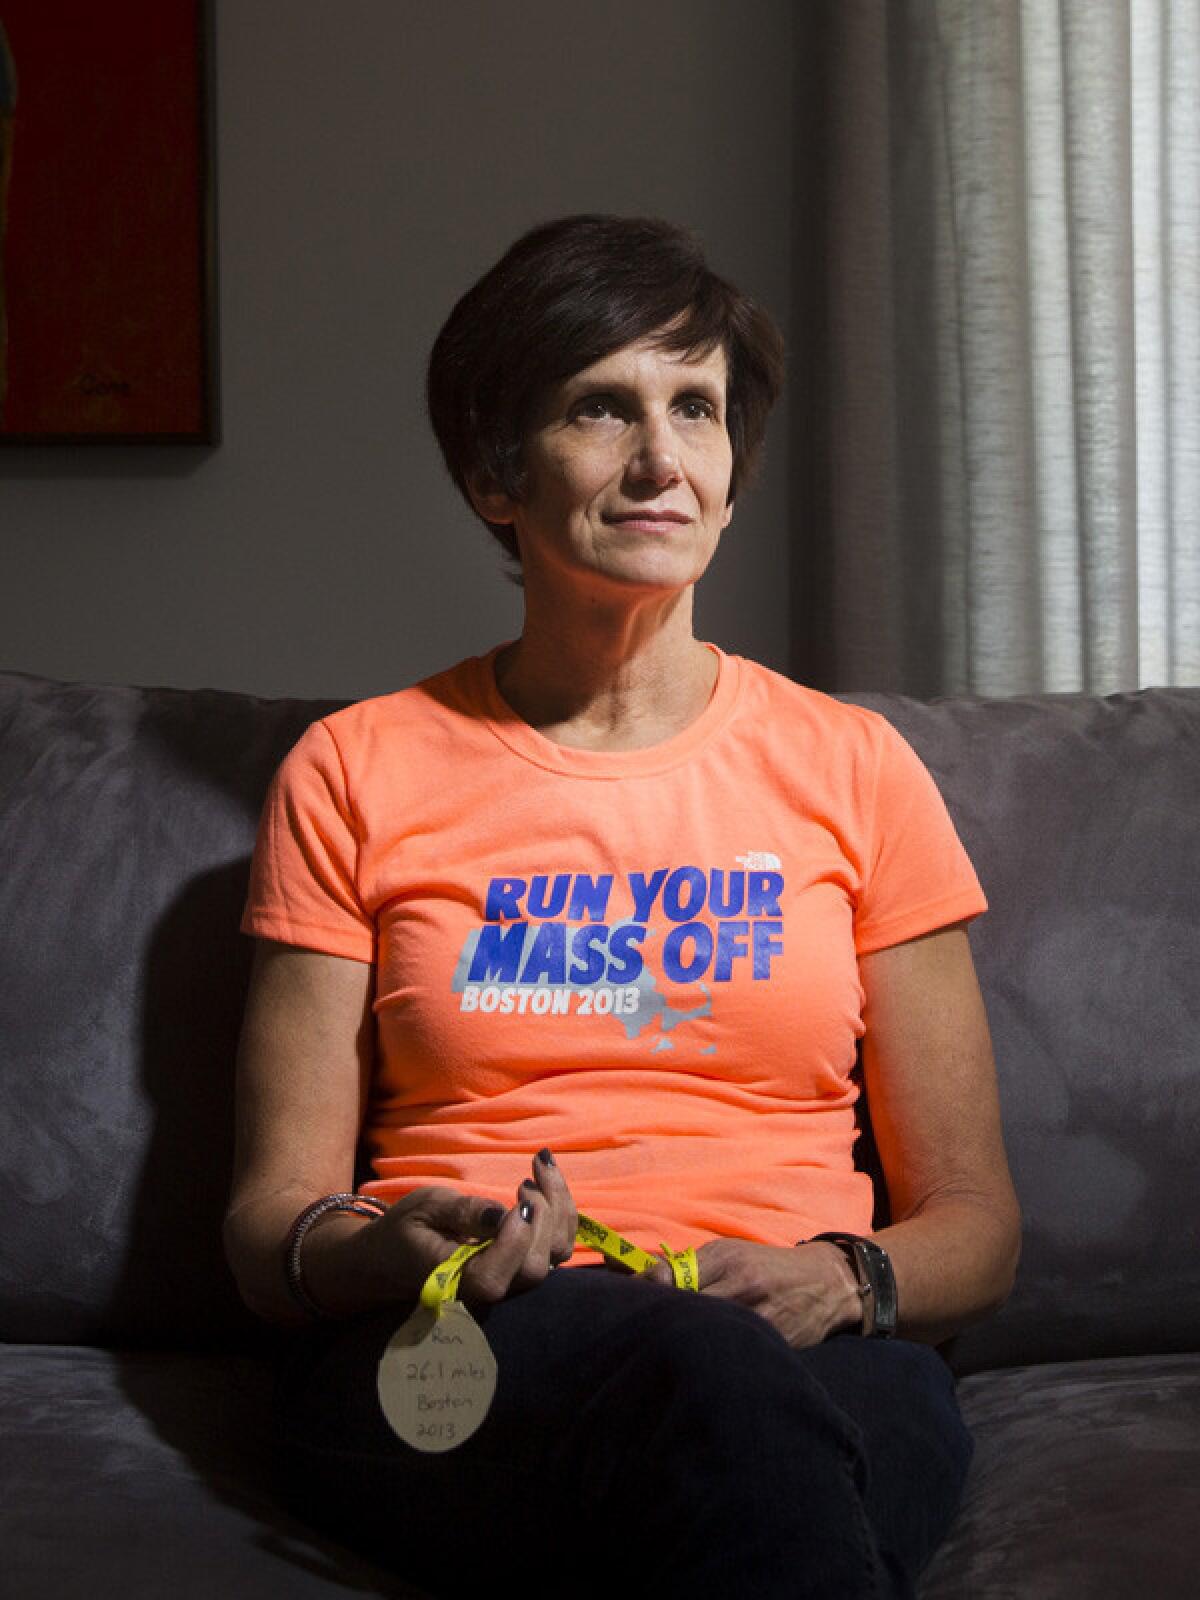 STUDIO CITY, CA -- APRIL 4, 2014--Runner Renee Opell, who attended the 2013 Boston Marathon but was unable to finish because of the bombing, is photographed in her Studio City home, April 4, 2014. (Jay L. Clendenin / Los Angeles Times)